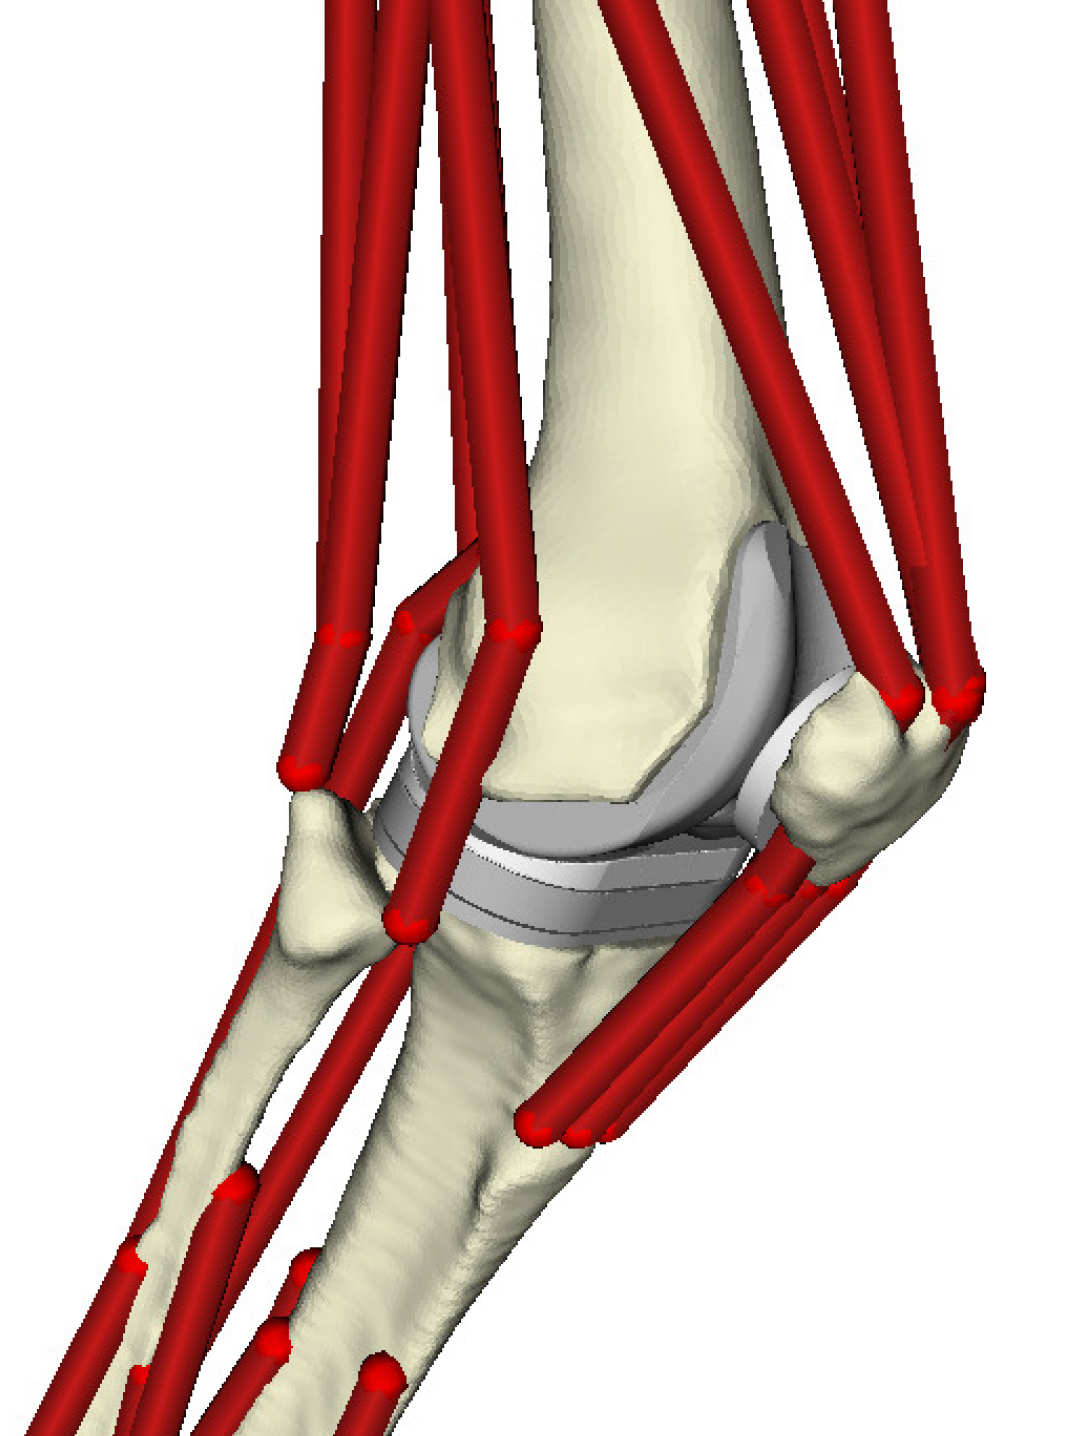 simulation of total knee replacemnt